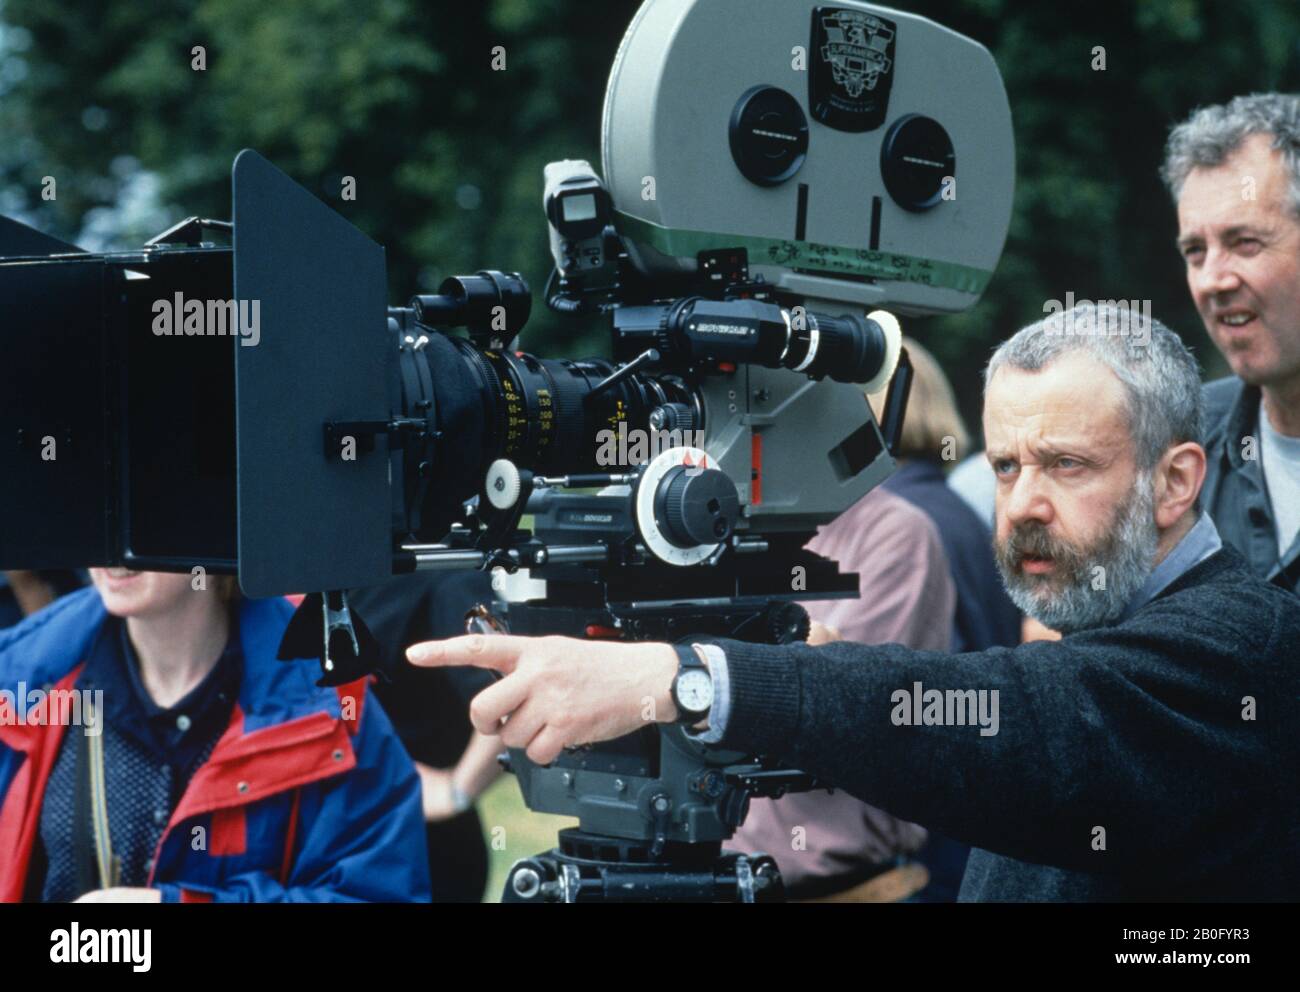 MIKE LEIGH ON SET SECRETS AND LIES (1996) OCTOBRE FILMS/MOVIESTORE COLLECTION LTD Banque D'Images